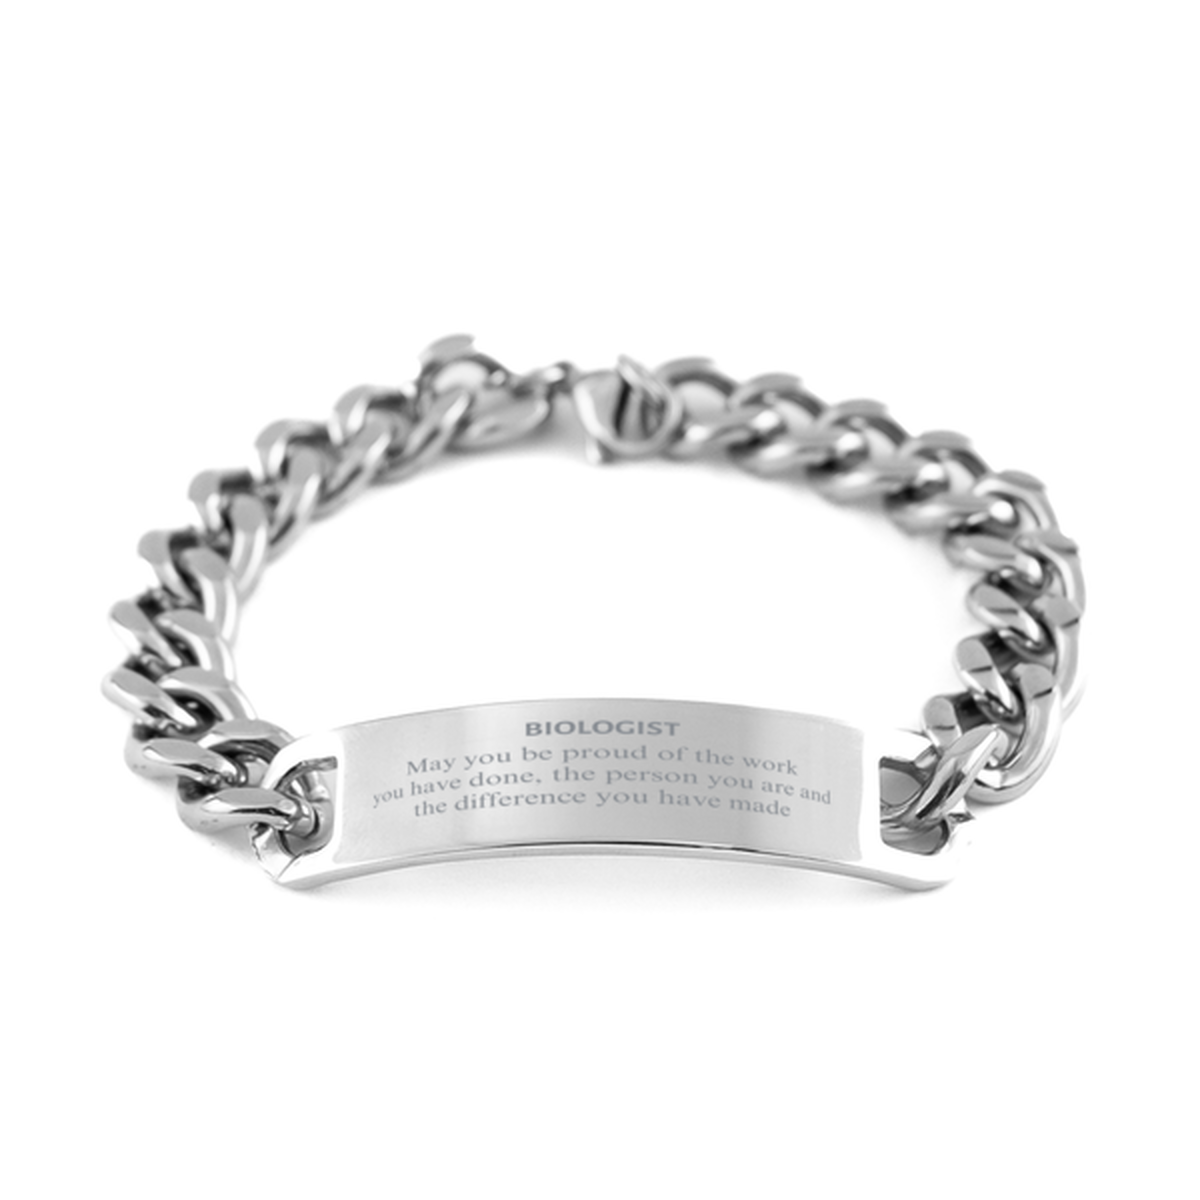 Biologist May you be proud of the work you have done, Retirement Biologist Cuban Chain Stainless Steel Bracelet for Colleague Appreciation Gifts Amazing for Biologist